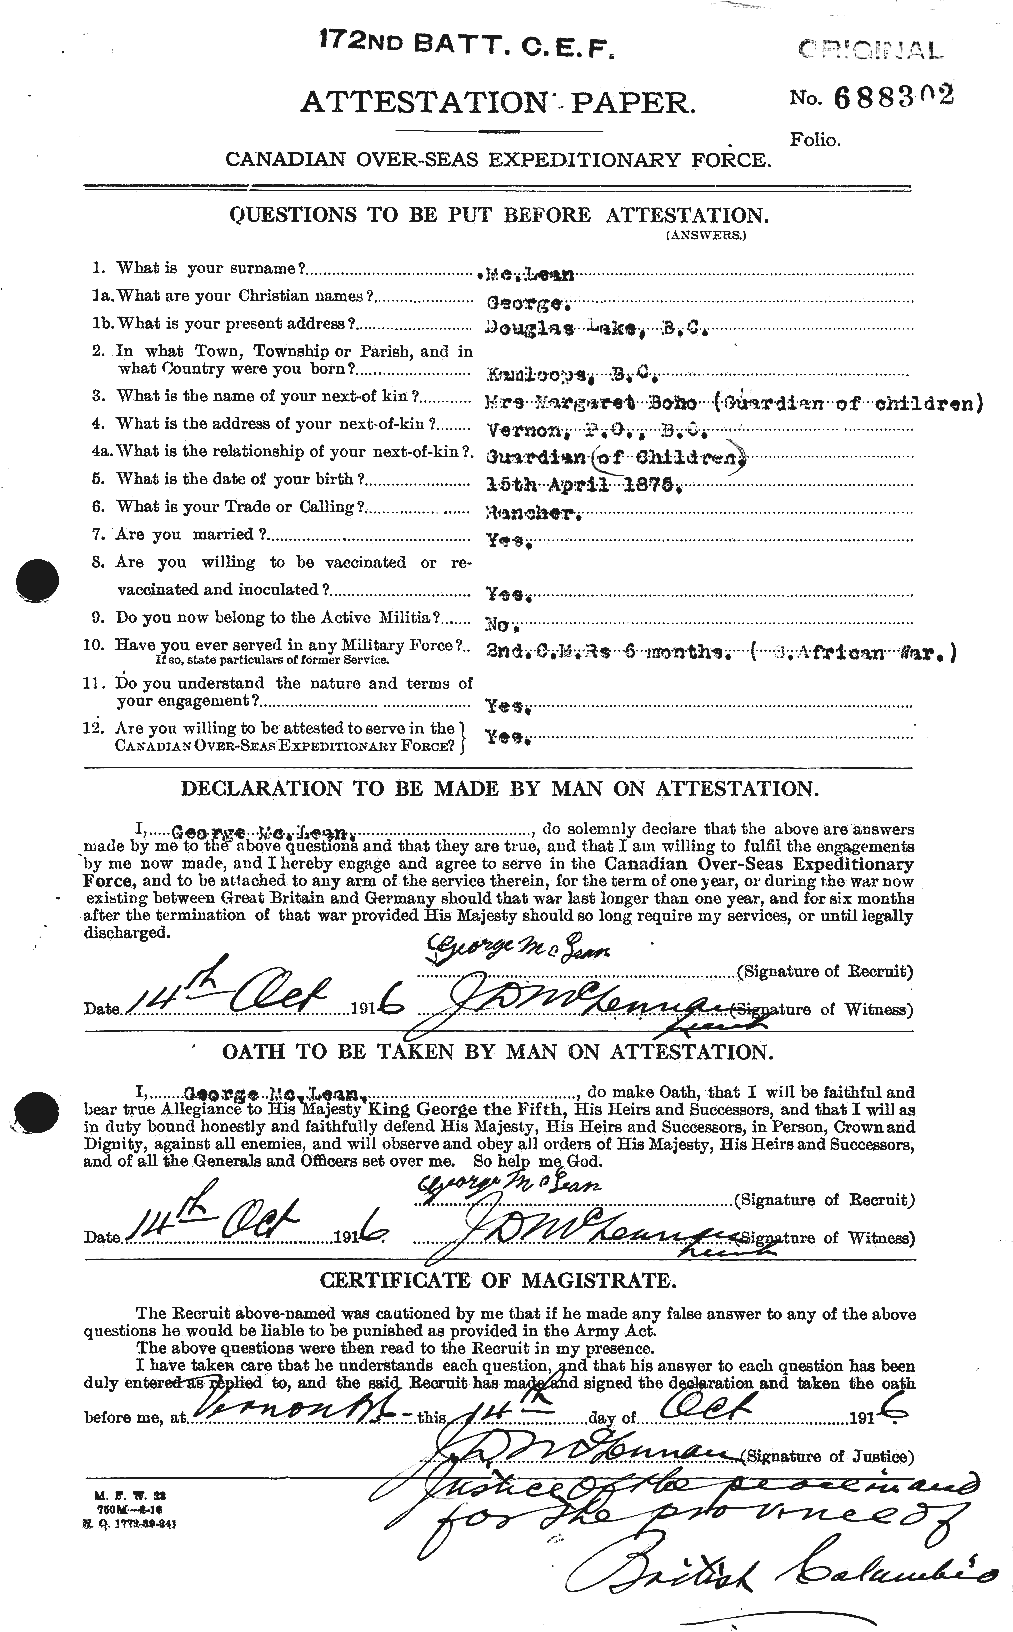 Personnel Records of the First World War - CEF 540260a